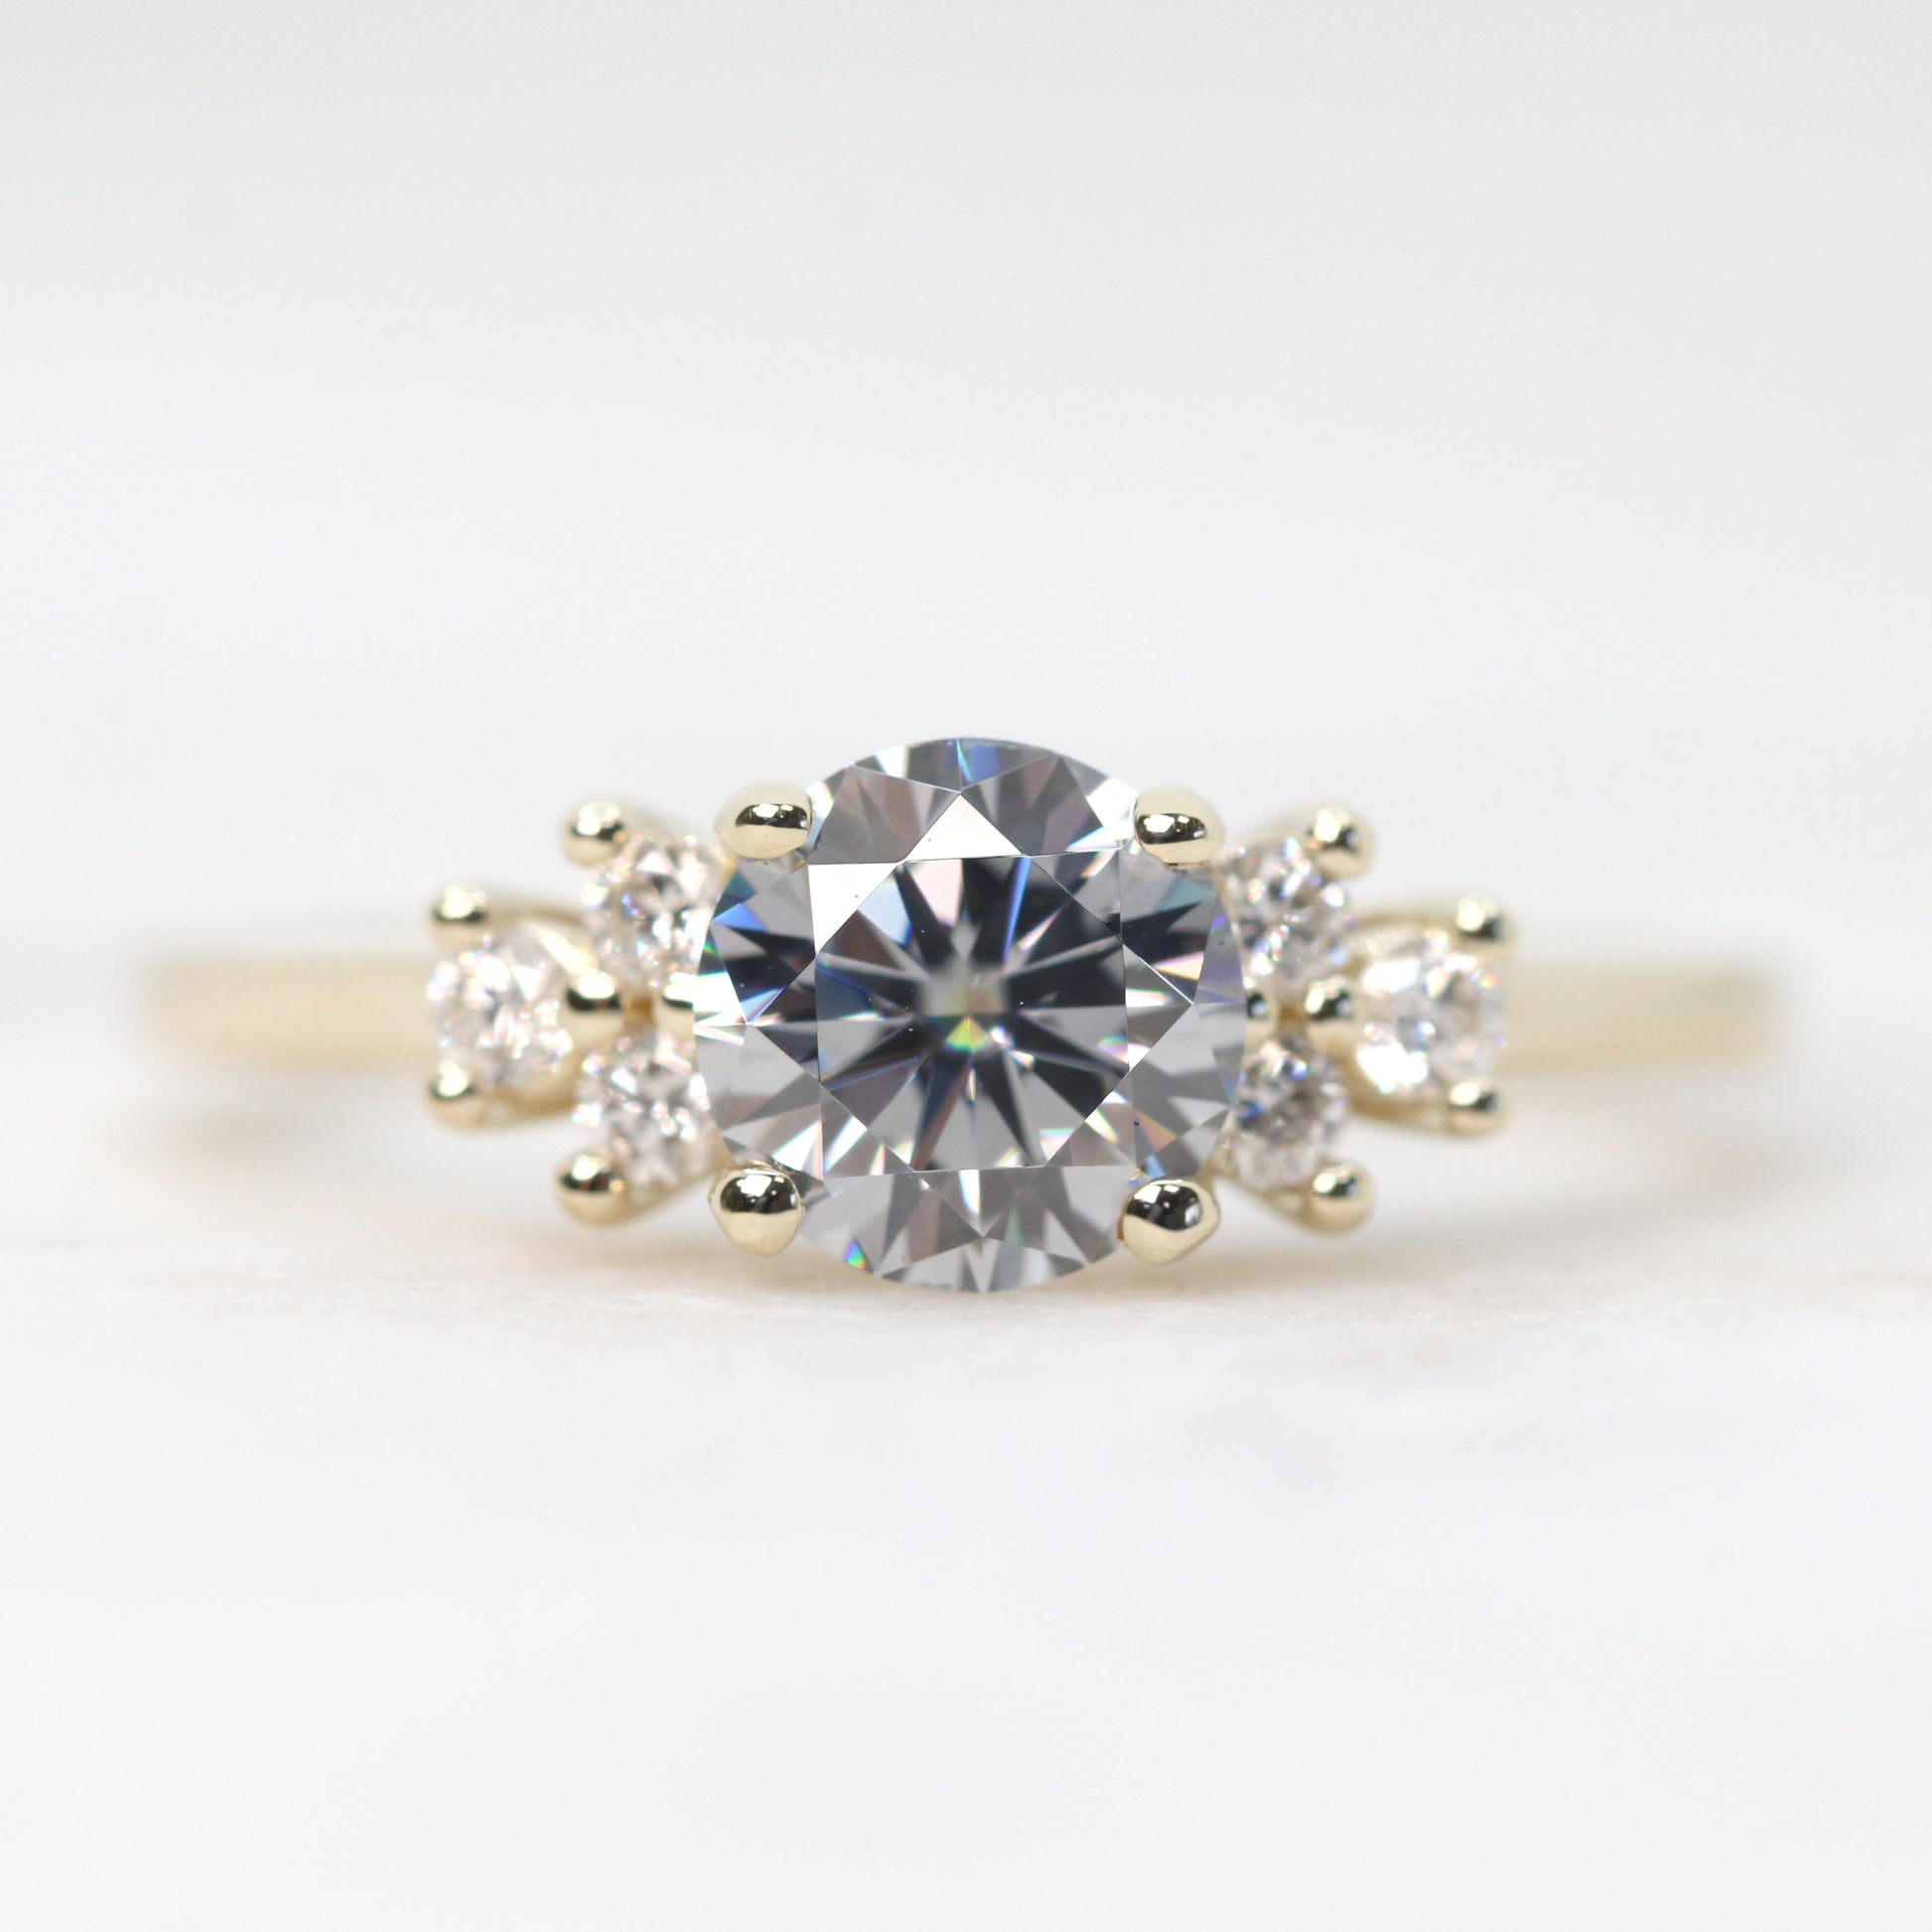 Veragene Ring with a 1 Carat Round Gray Moissanite and White Accent Diamonds - Made to Order, Choose Your Gold Tone - Midwinter Co. Alternative Bridal Rings and Modern Fine Jewelry